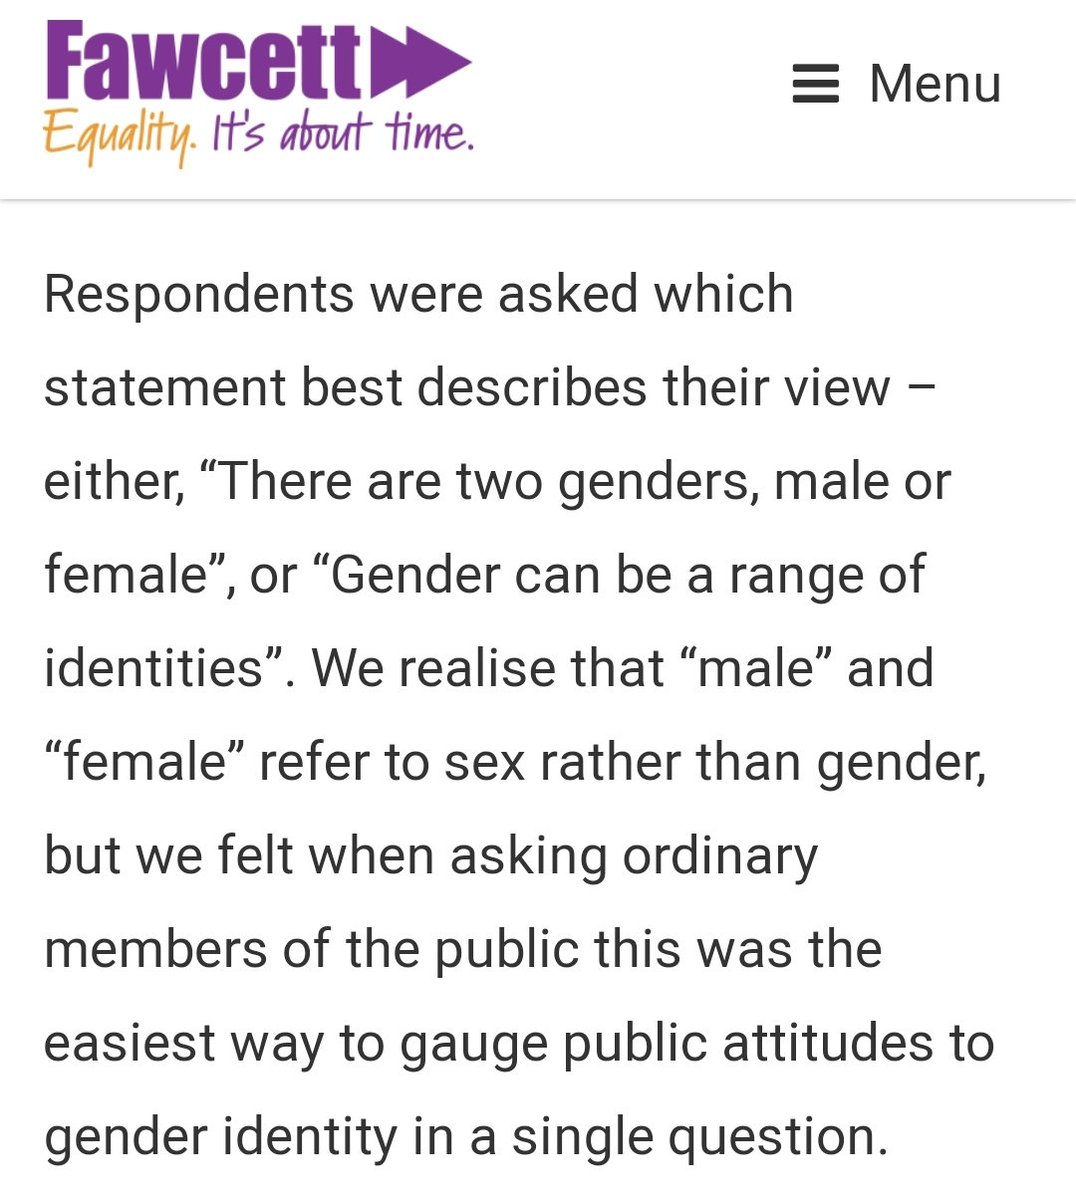 But they had made the mistake of conflating sex and gender when they surveyed the public (Why?? Perhaps they first consulted their ally organisations and let them set the terms?)